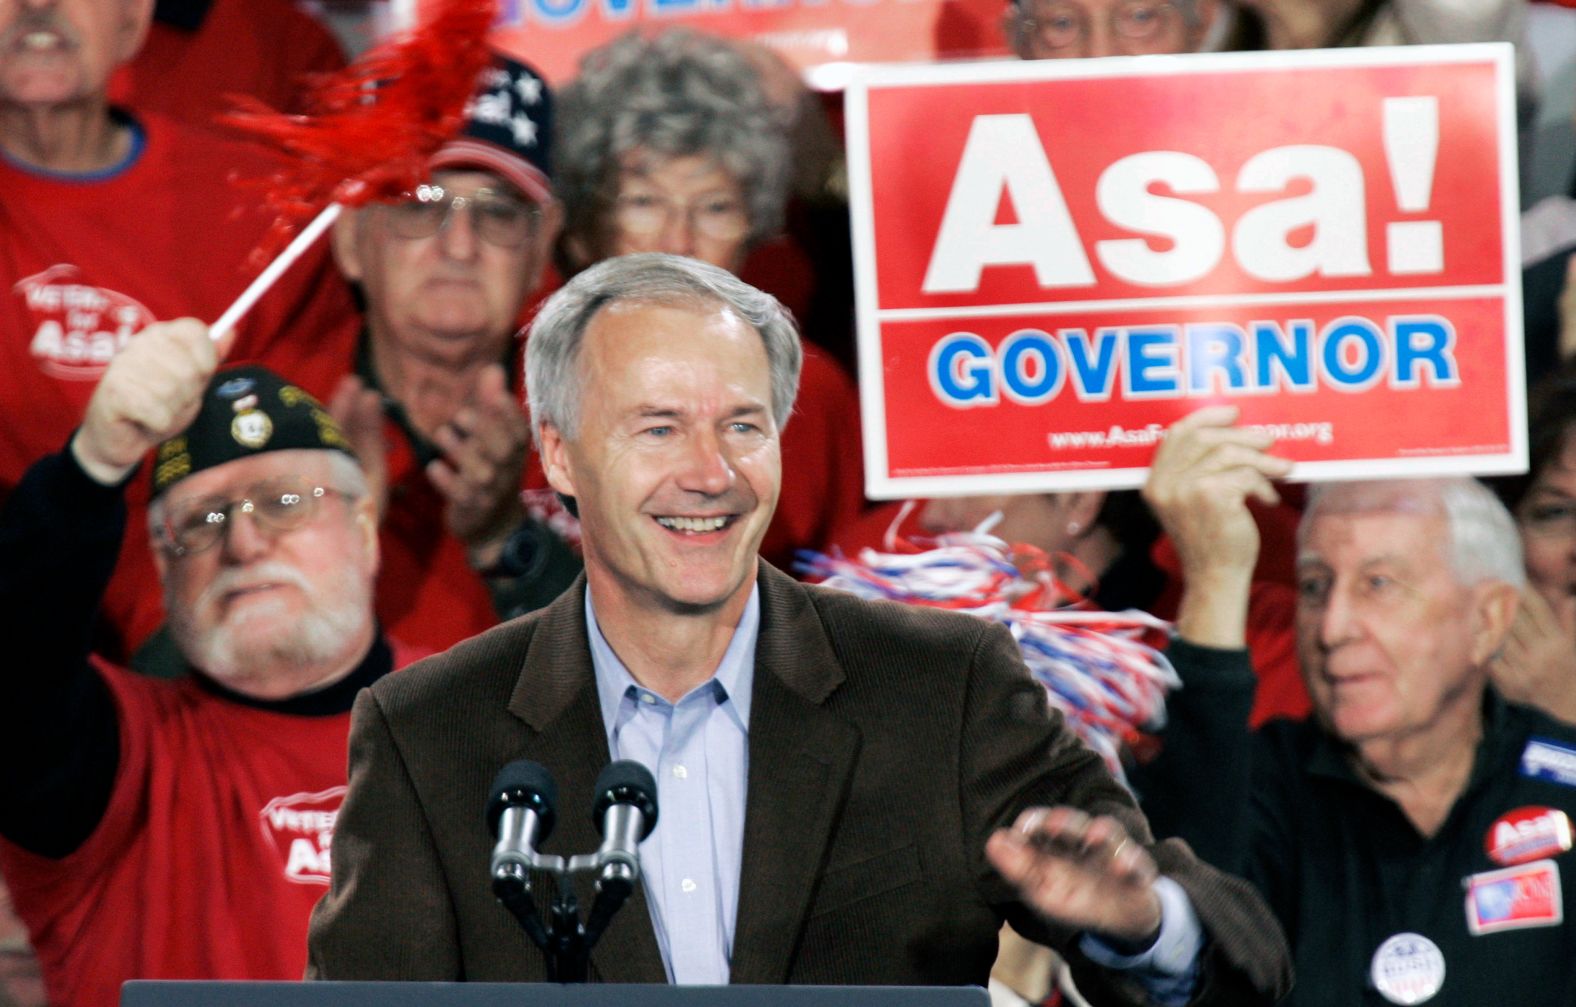 Hutchinson is greeted at a rally in Highfill, Arkansas, in November 2006. He lost the election that year to Democrat Mike Beebe.